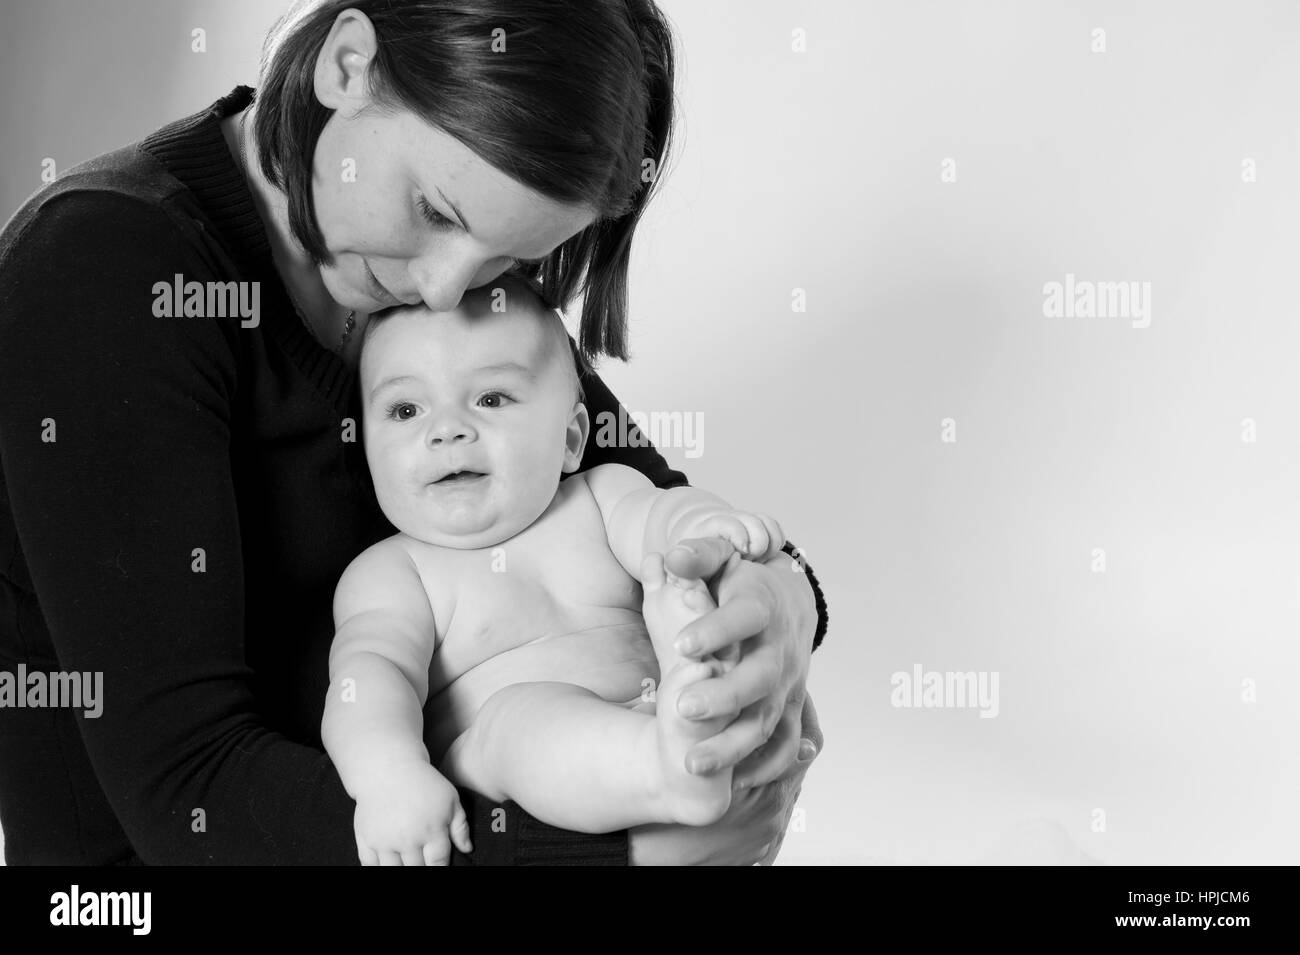 Model released , Mutter mit Baby - mother with baby Stock Photo